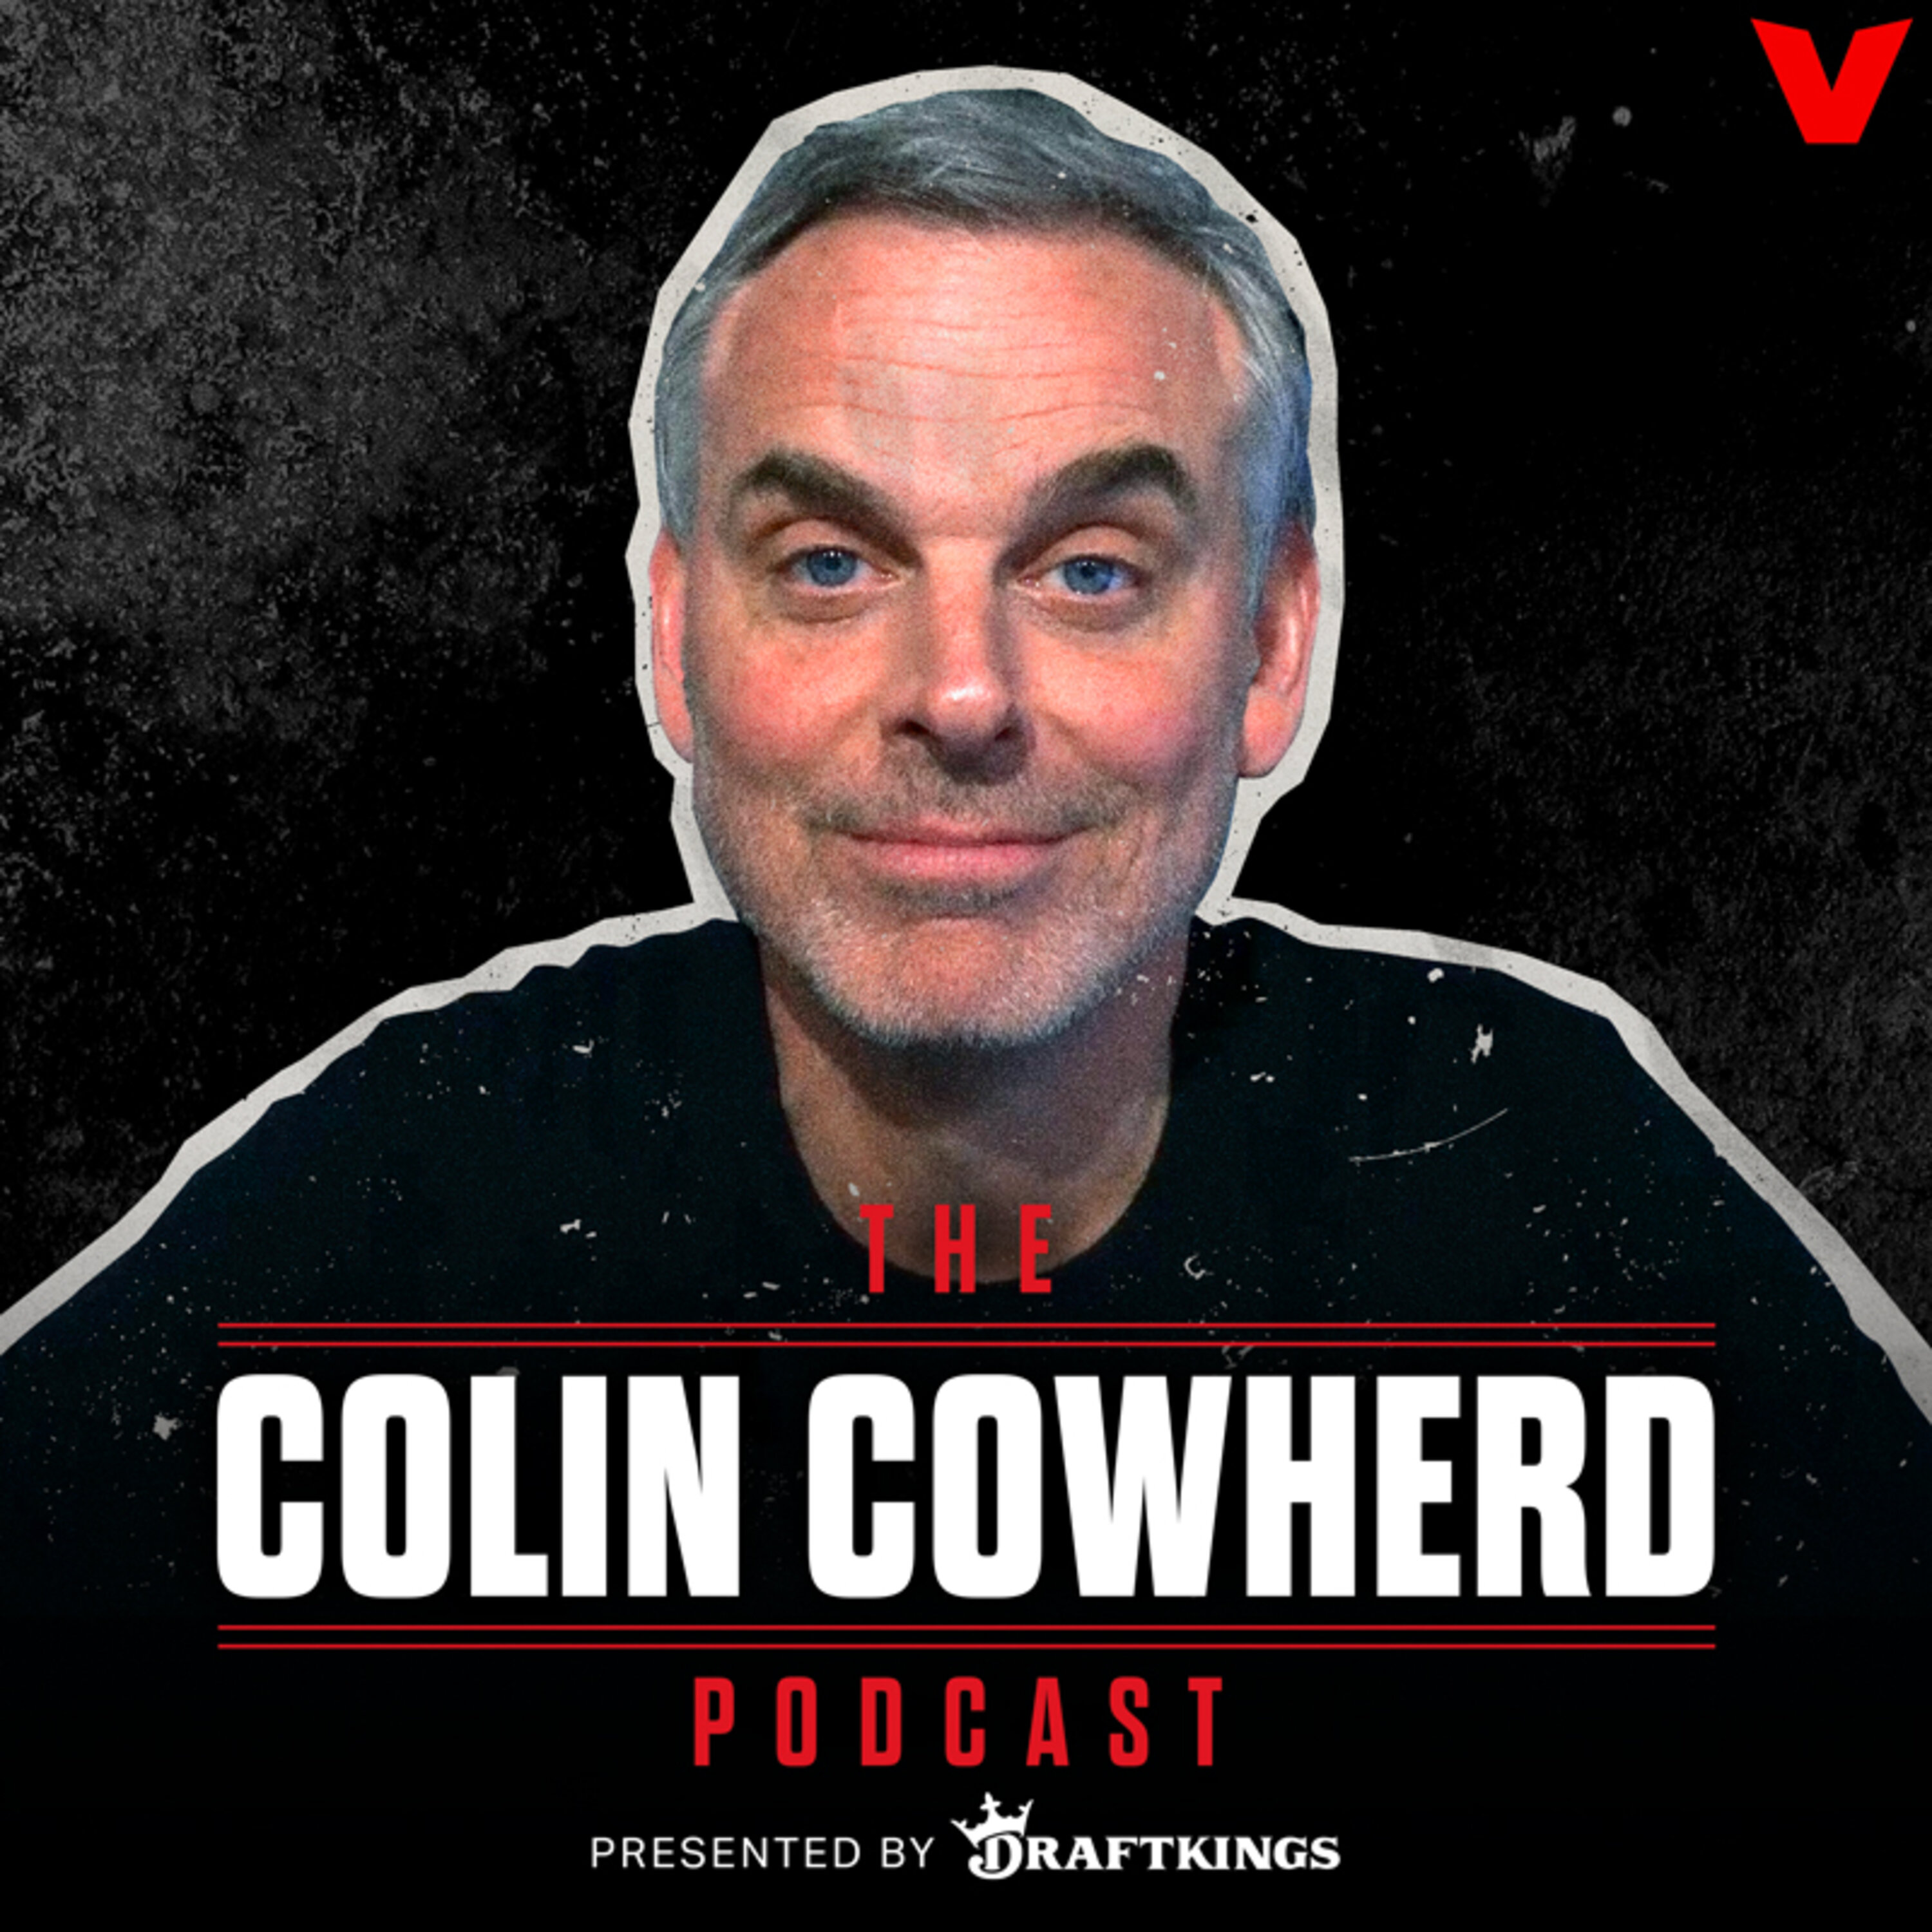 Colin Cowherd Podcast - INSTANT REACTION: NFL Free Agency Frenzy, Kirk Cousins to Falcons, Barkley and Jacobs In Perfect Situations